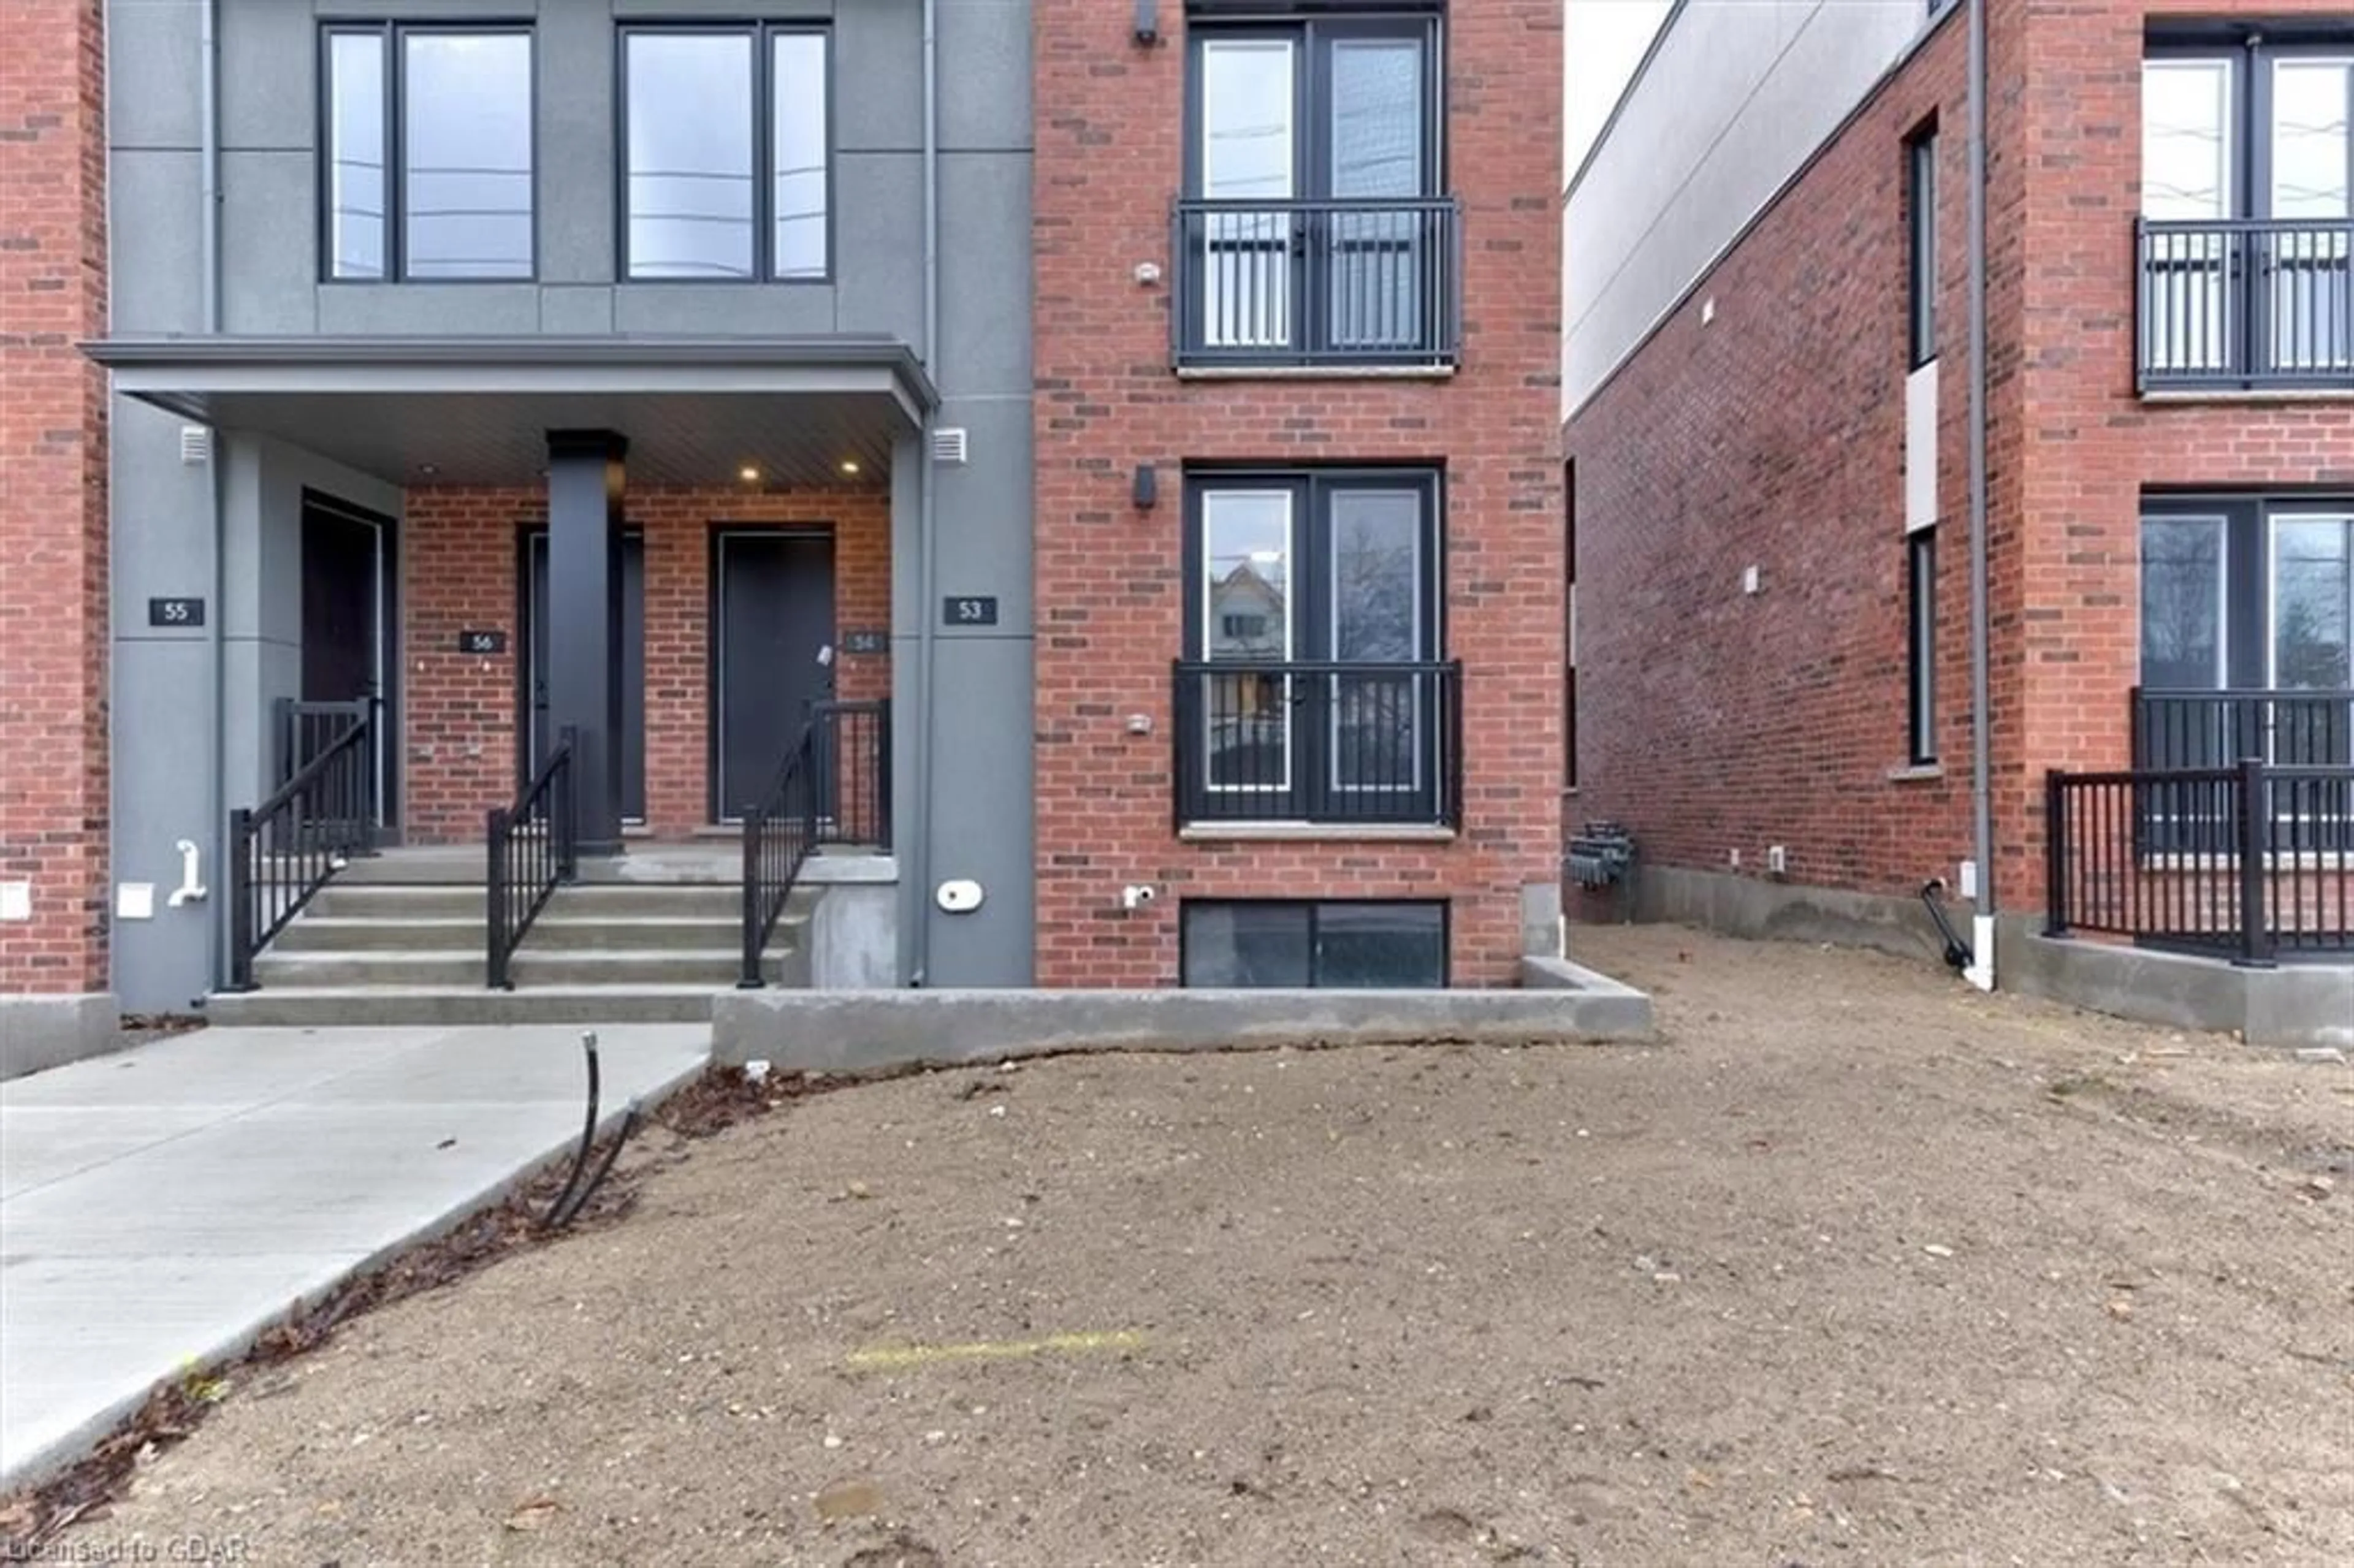 Home with brick exterior material for 99 Roger St #53, Waterloo Ontario N2J 1A4